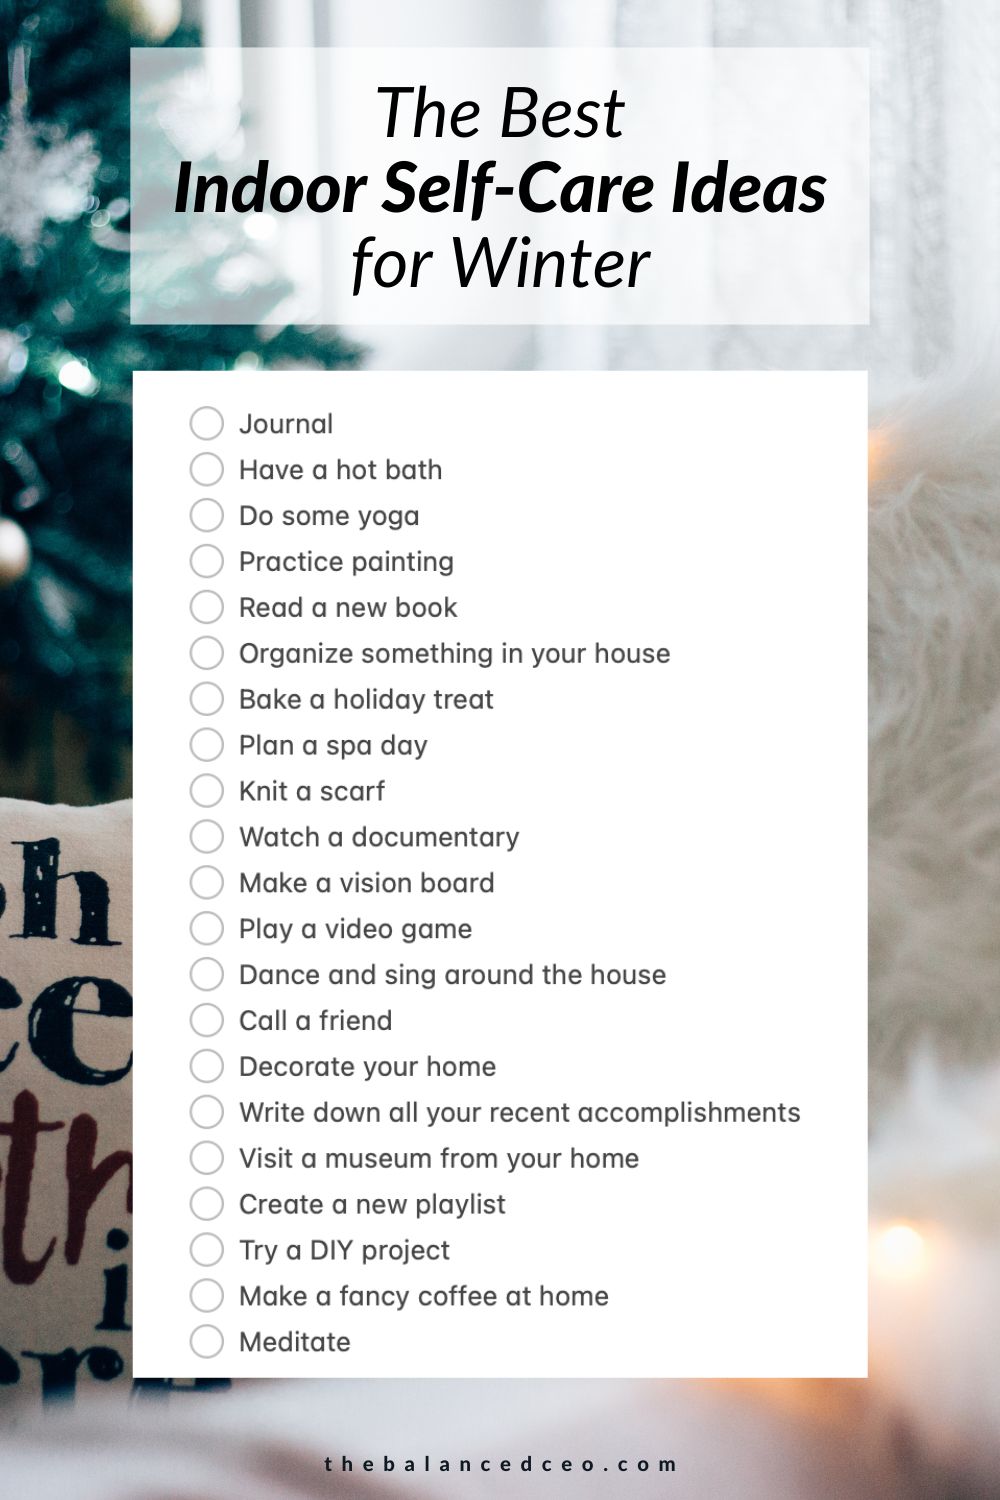 Self-Care Activities for Winter